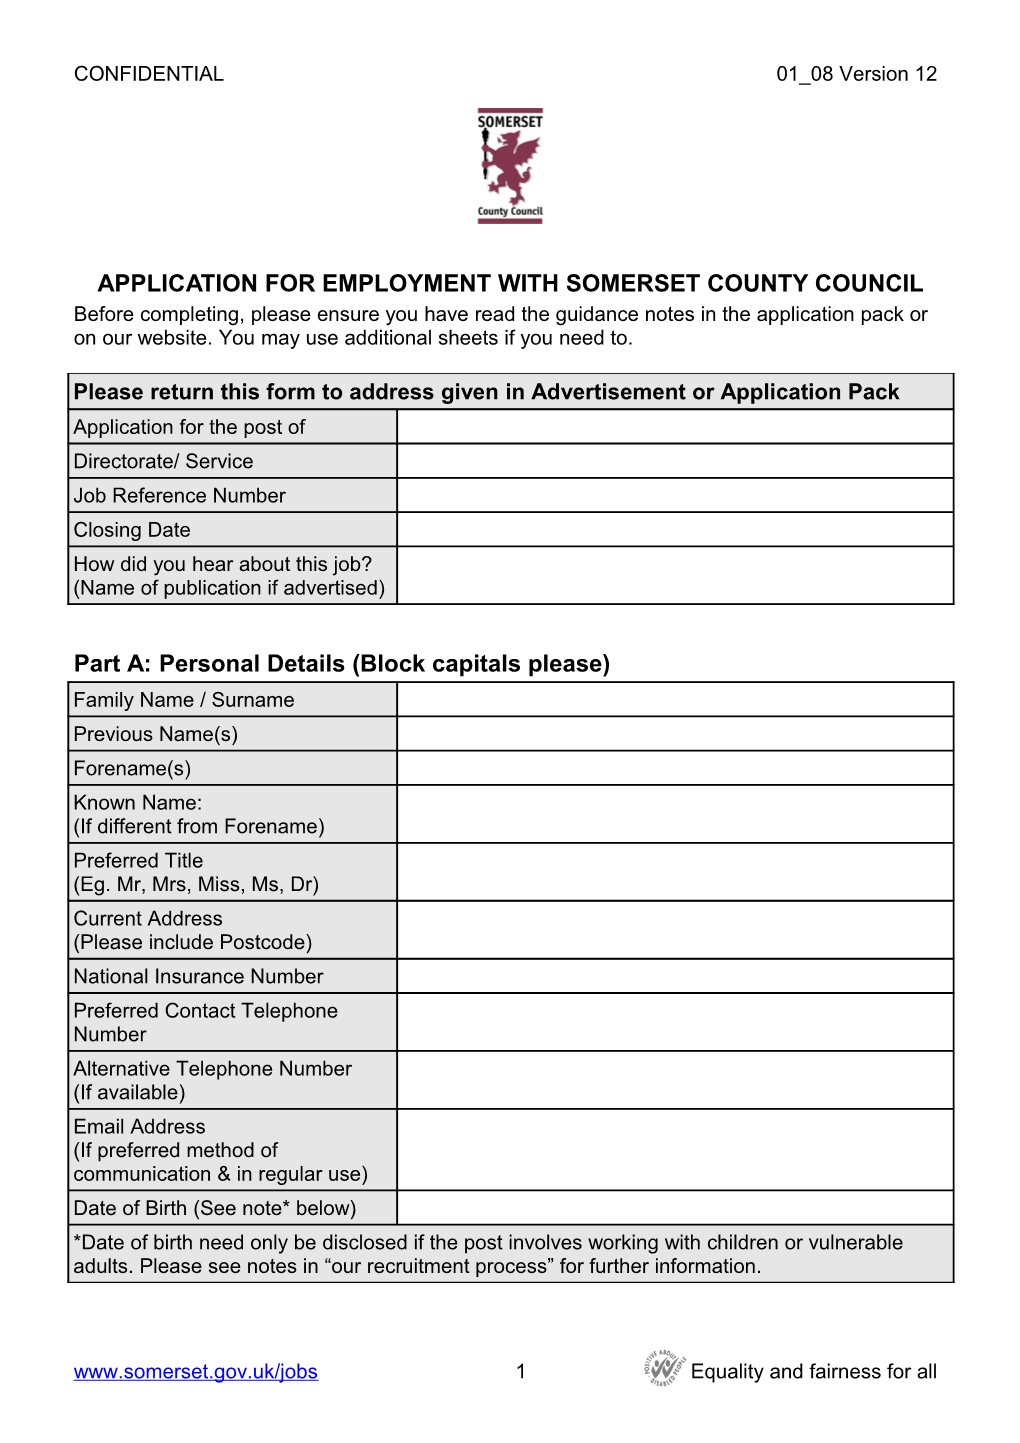 Application for Employment with Somerset County Council